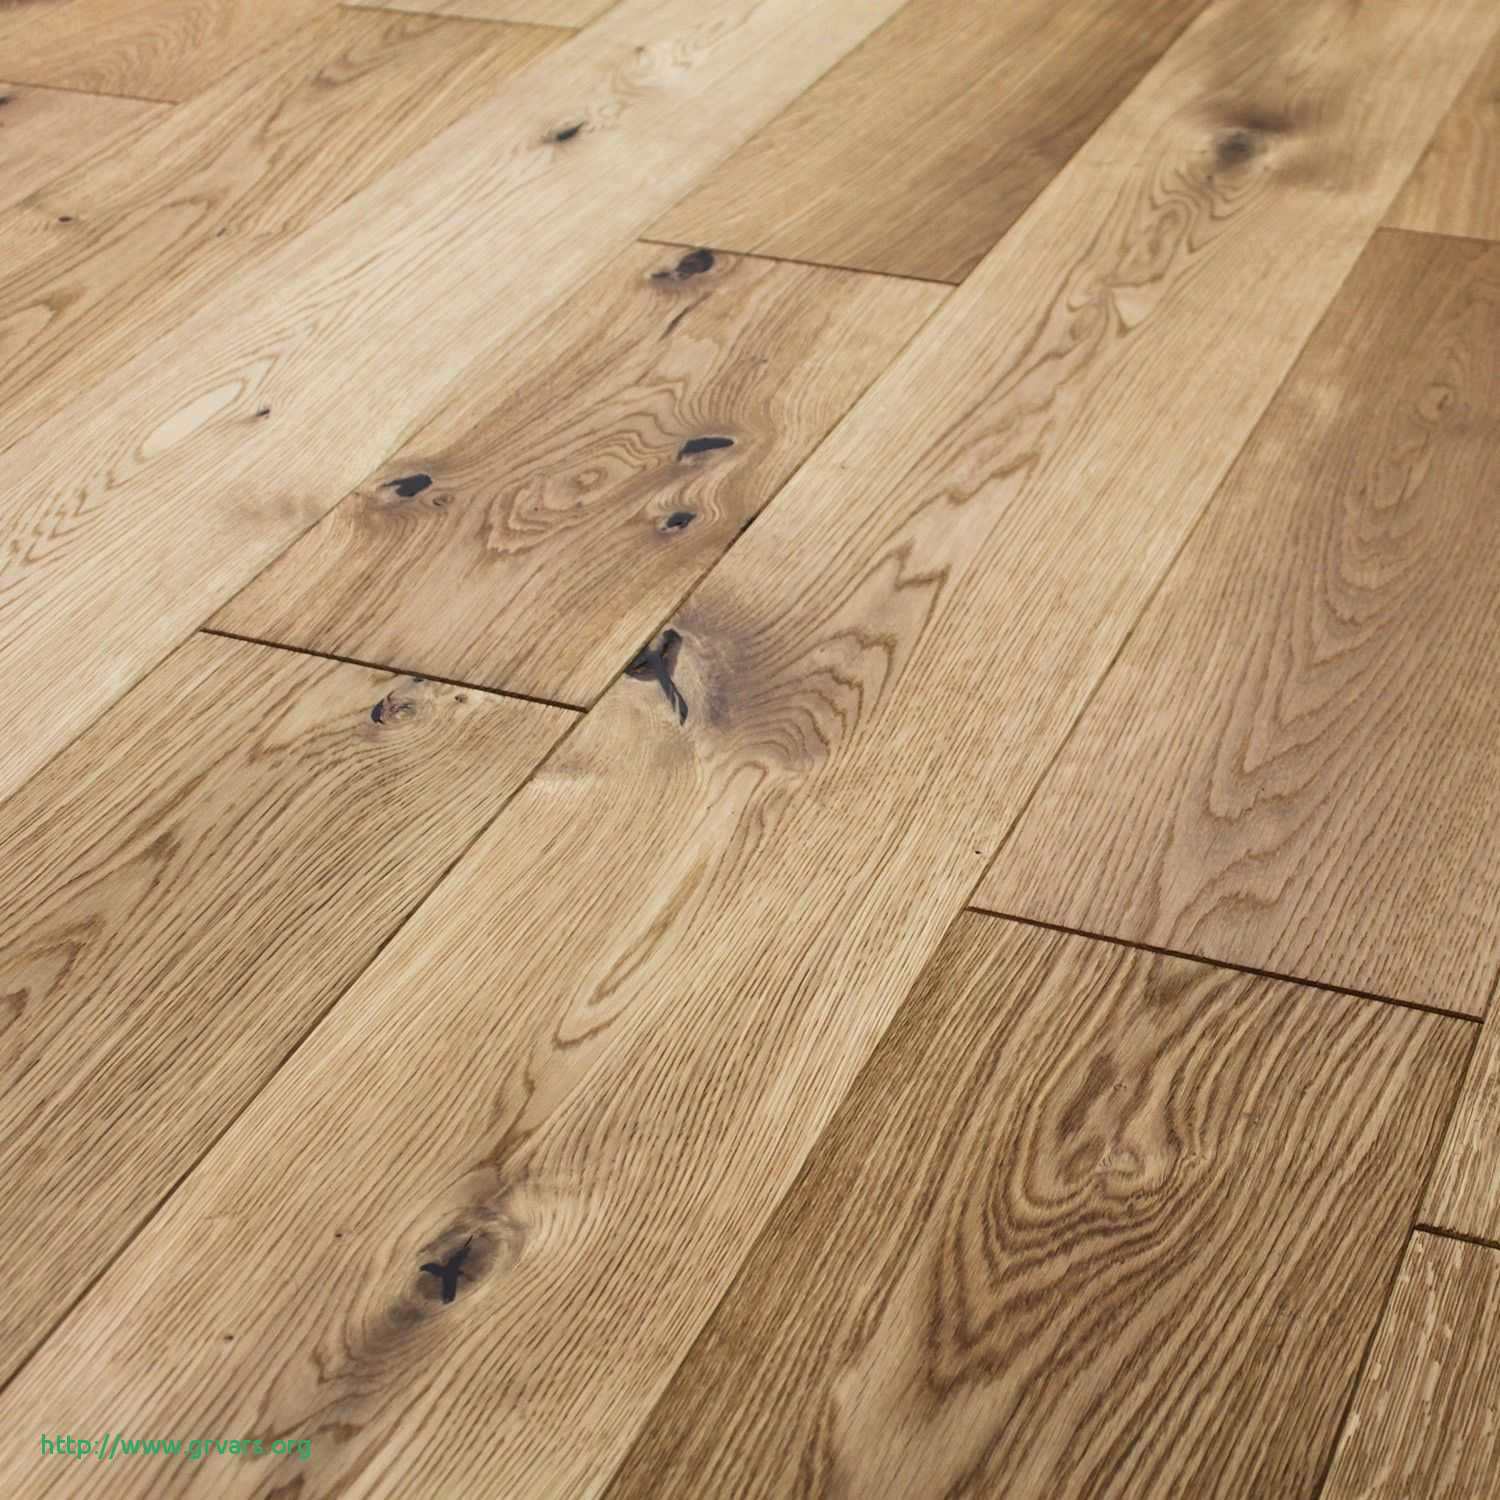 best way to install engineered hardwood flooring on concrete of 15 alagant best way to install engineered wood flooring ideas blog intended for best way to install engineered wood flooring meilleur de rustic cottage oak brushed